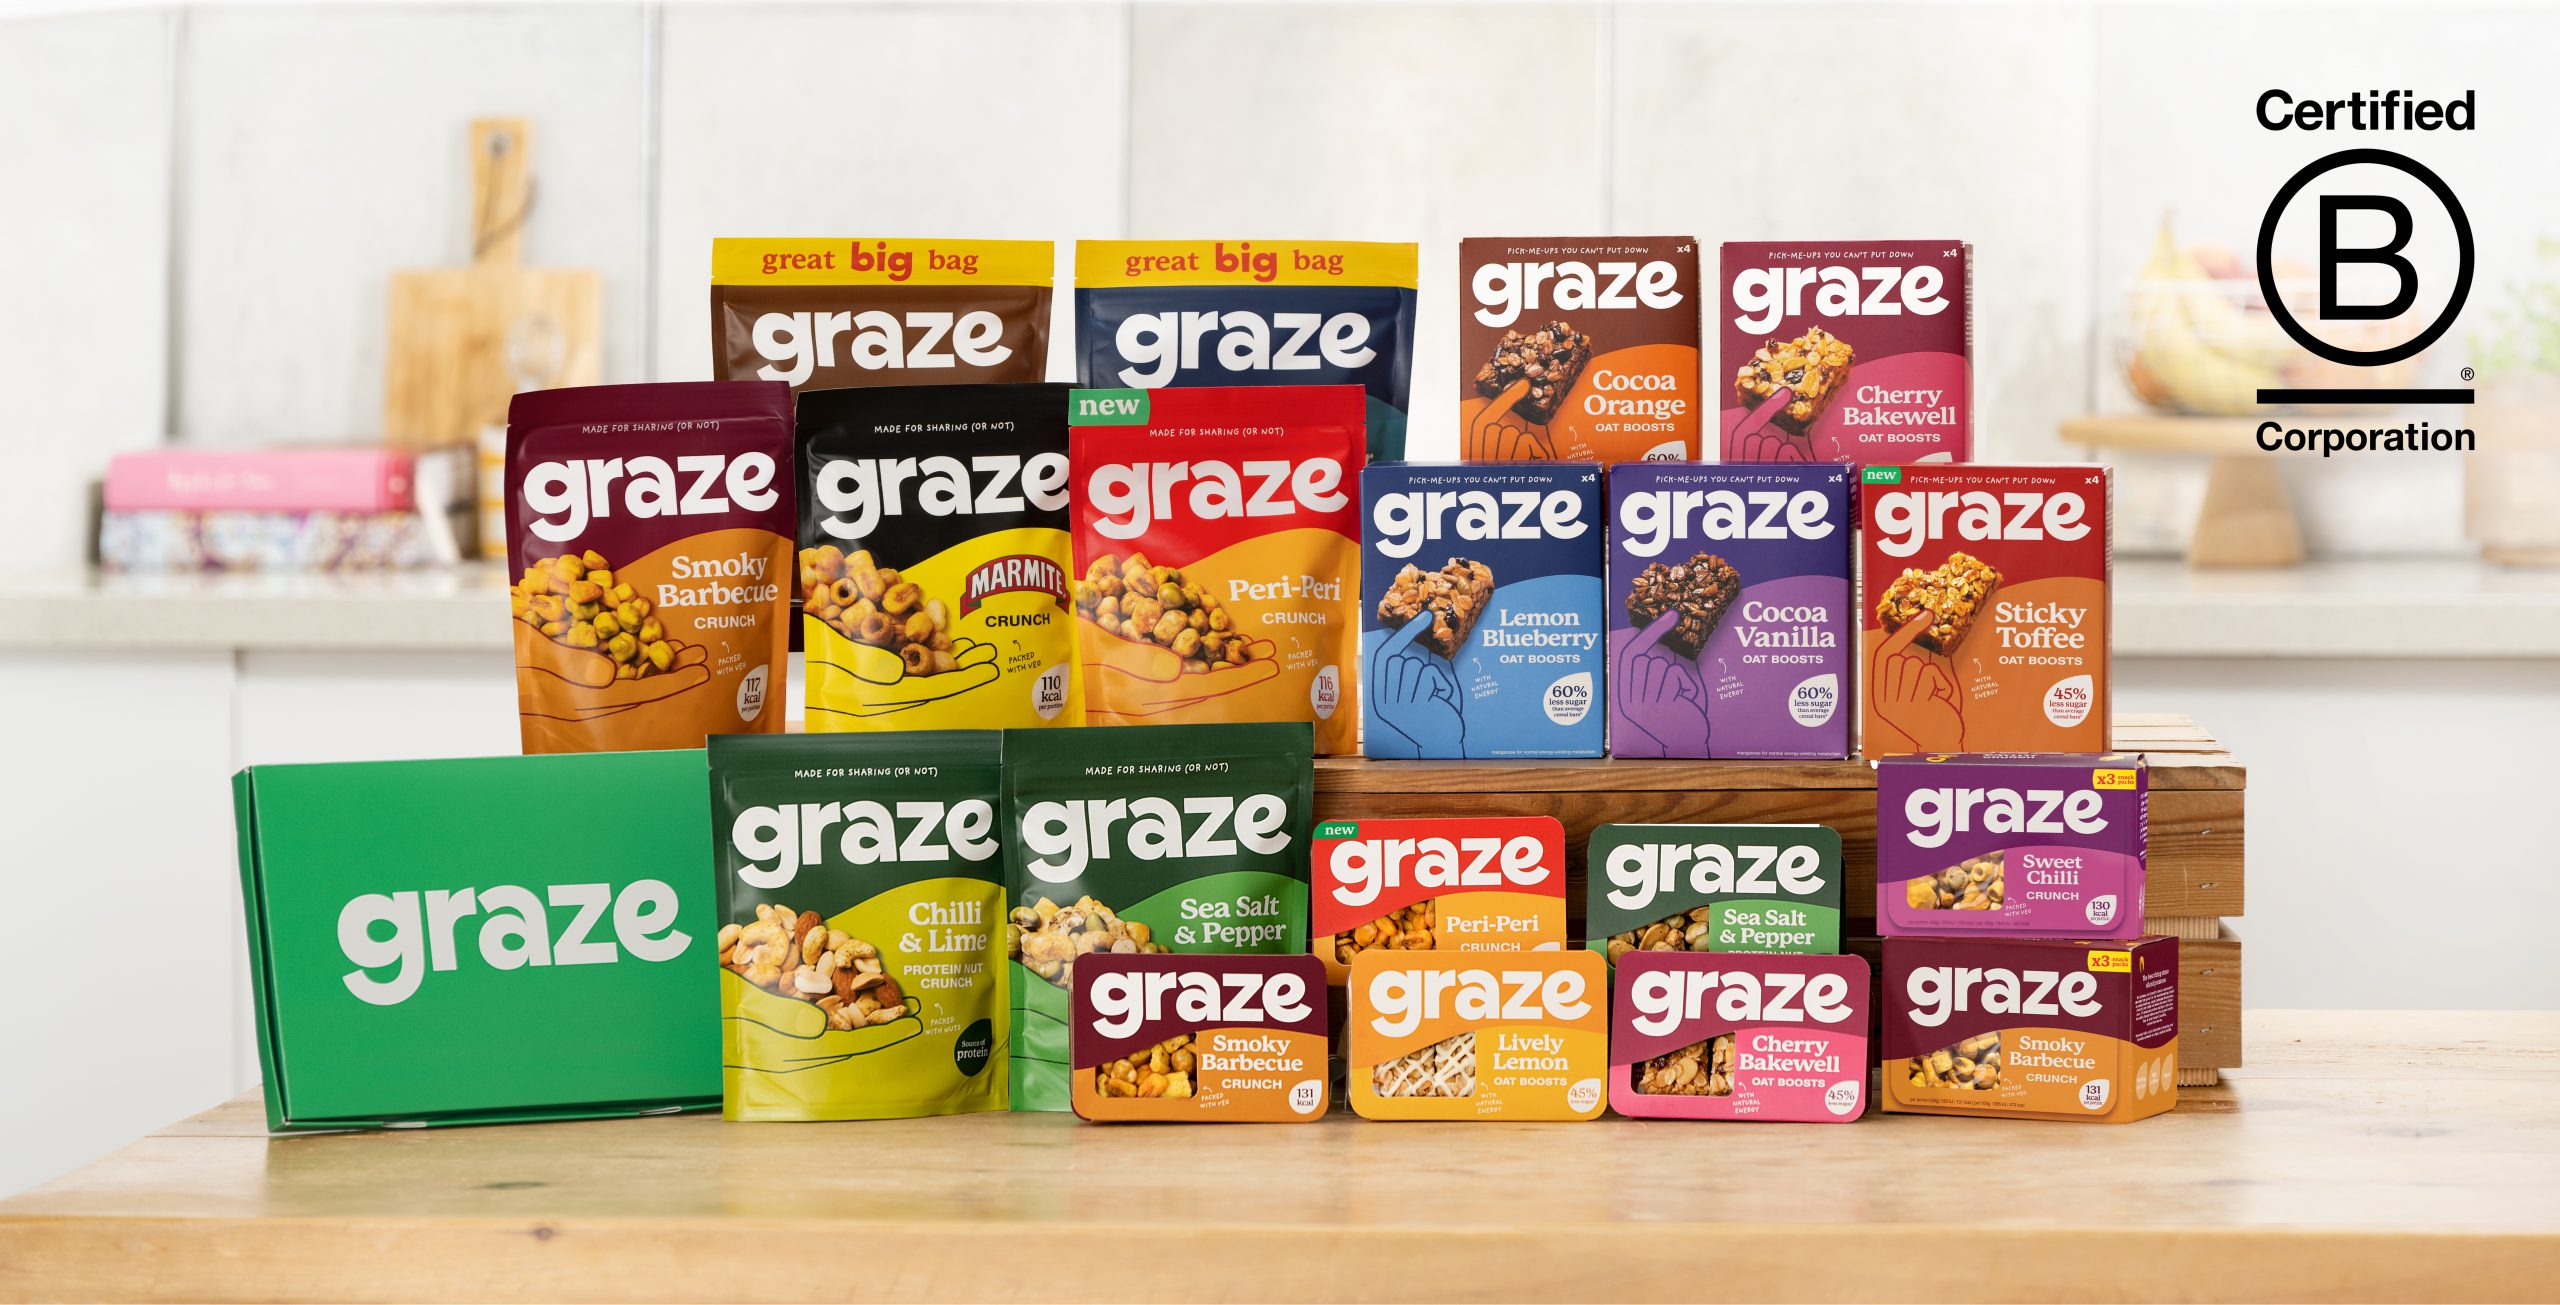 Graze launches new brand identity and innovation to market